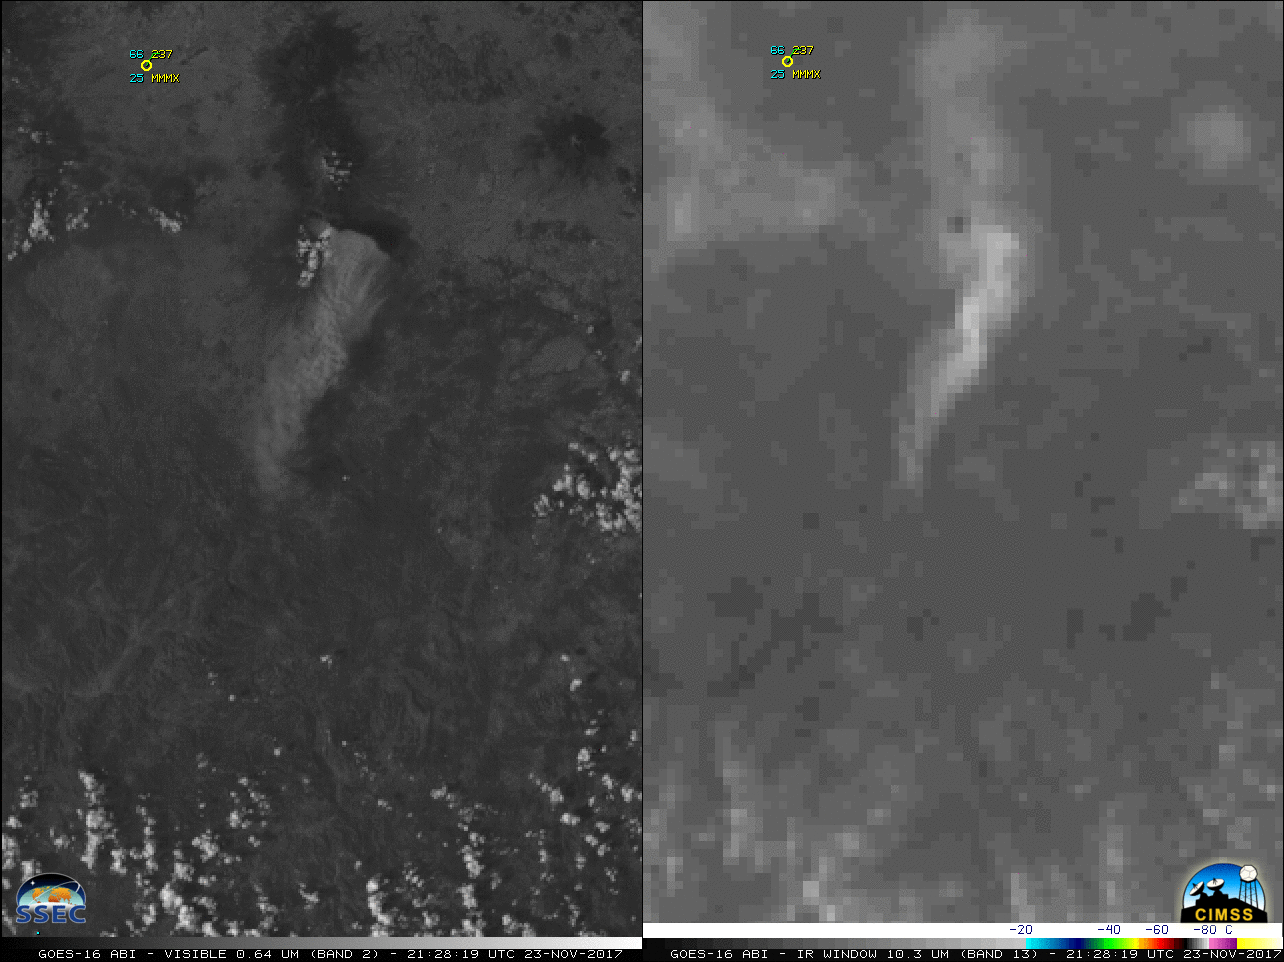 GOES-16 Visible (0.64 µm, left) and Infrared Window (10. µm, right) images, with plots of hourly surface reports [click to play animation]